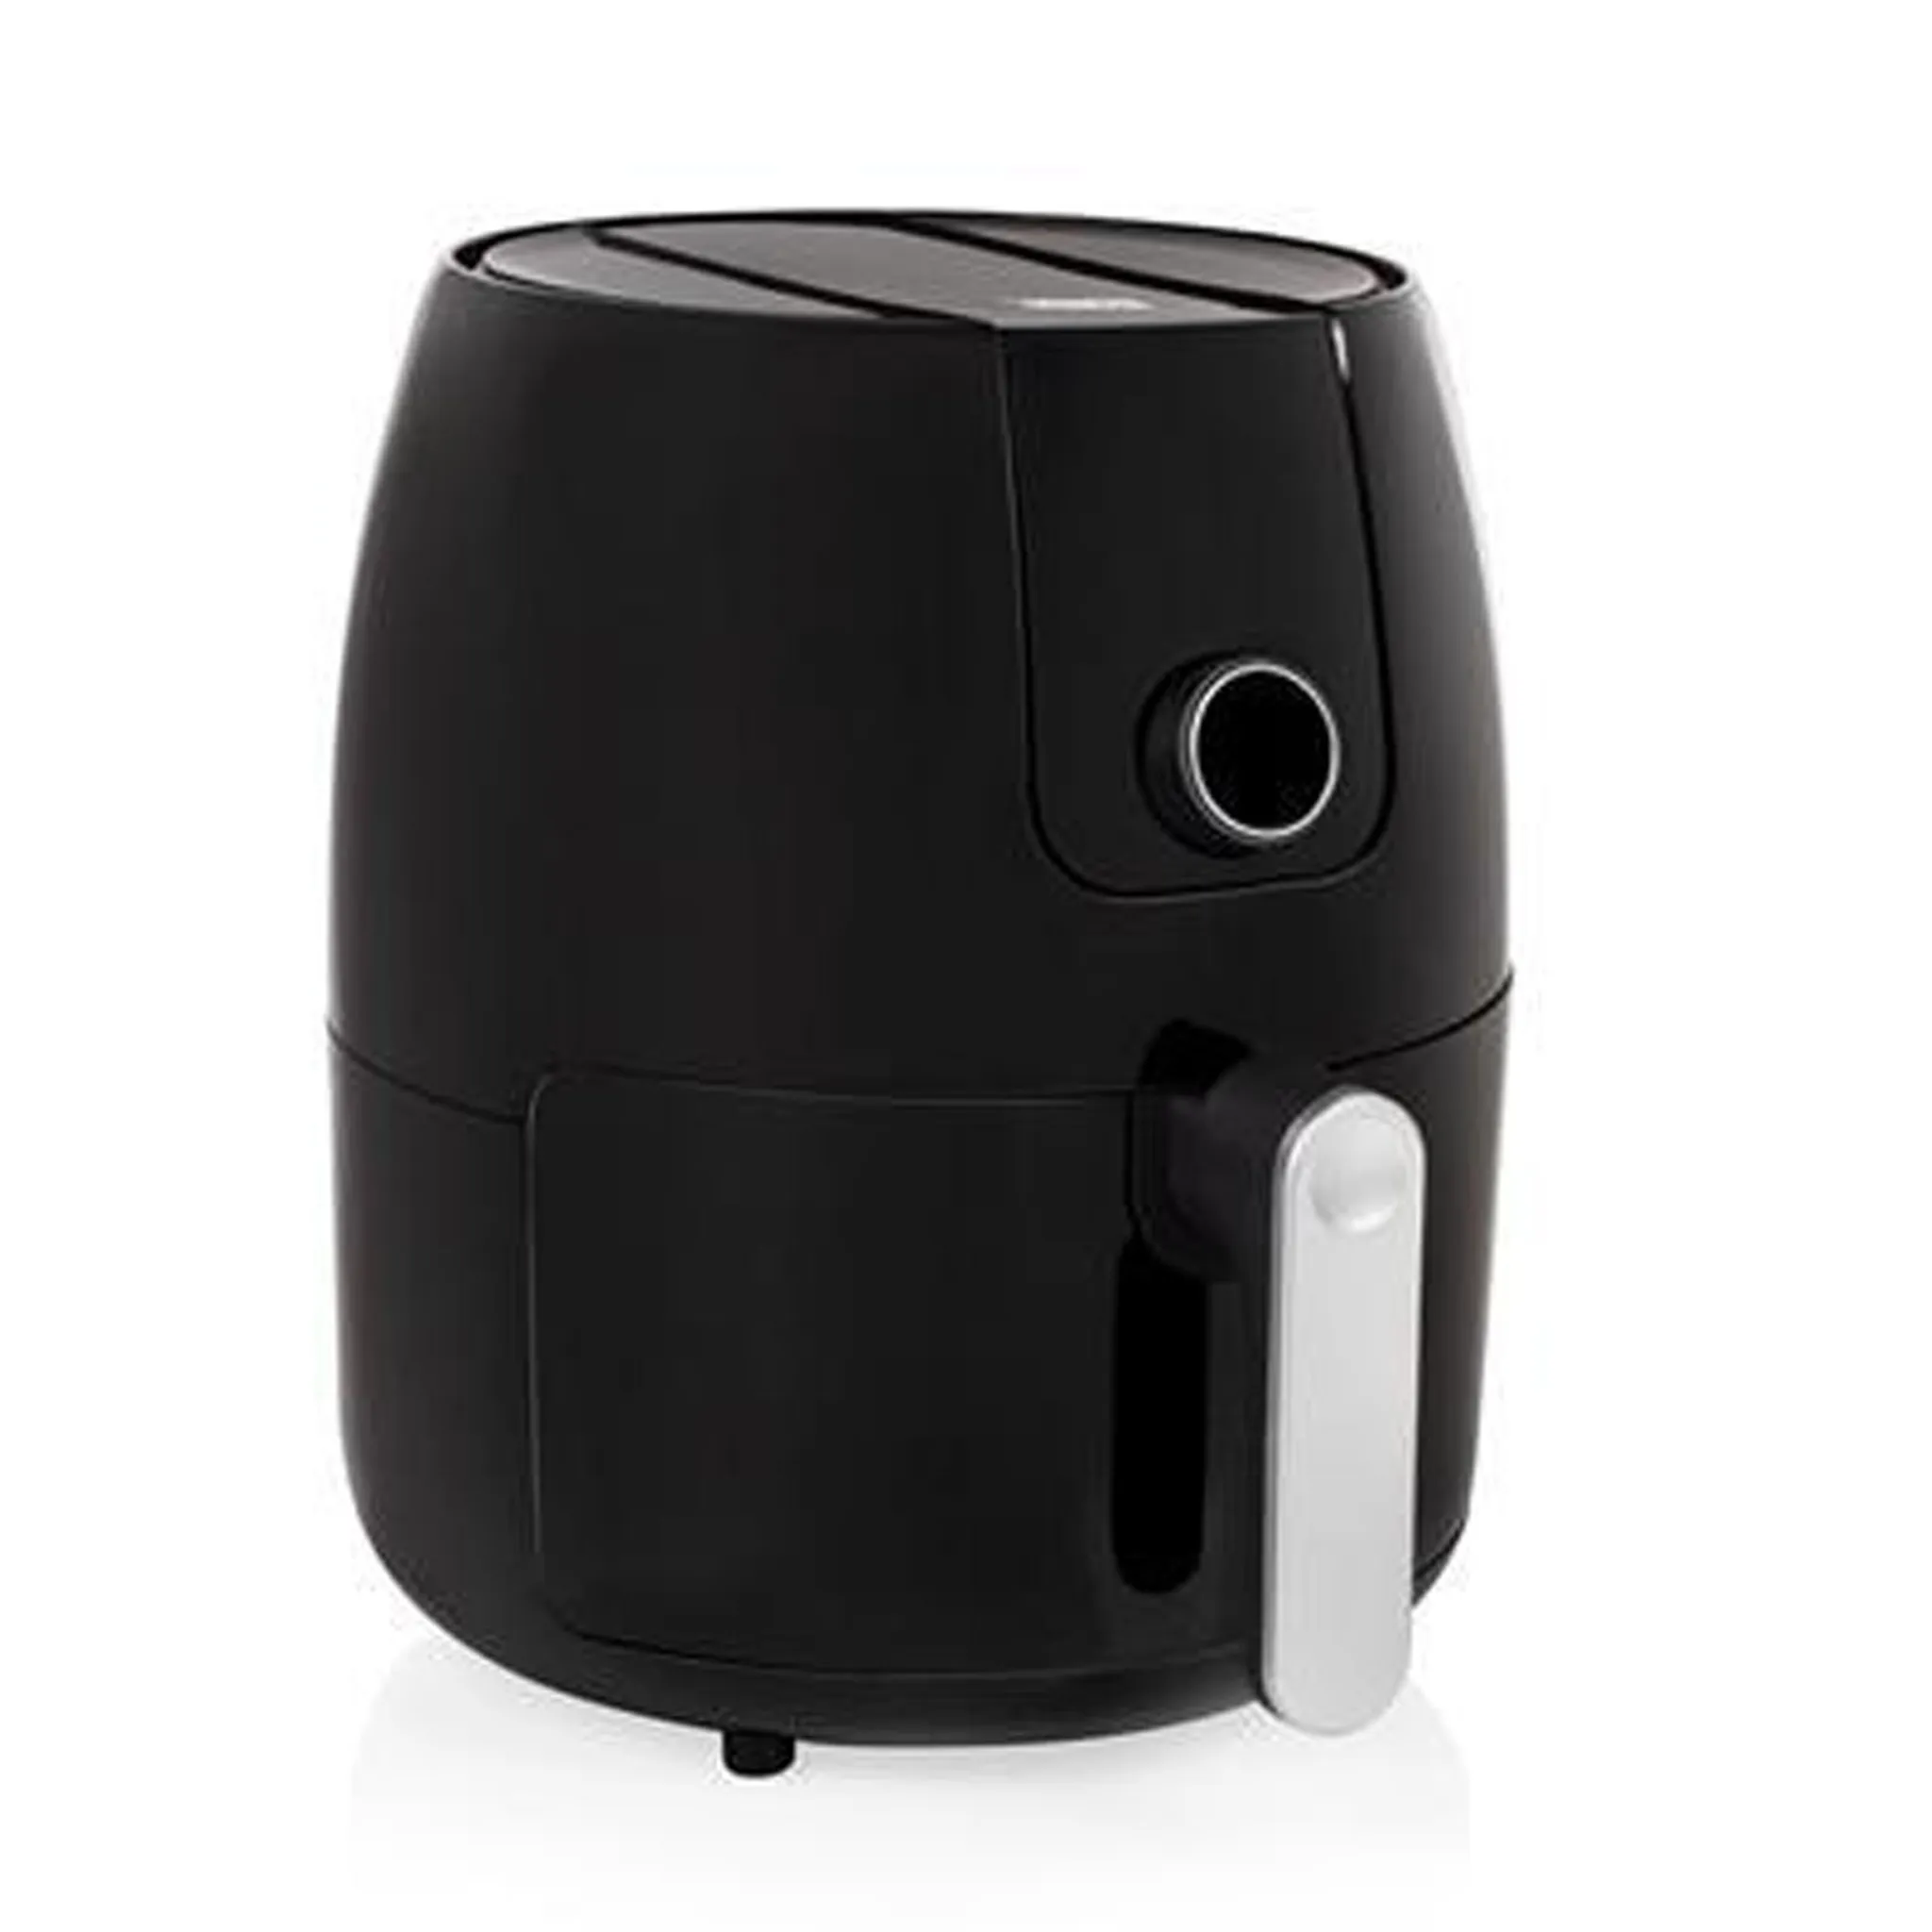 Princess 182092 Airfryer Grill